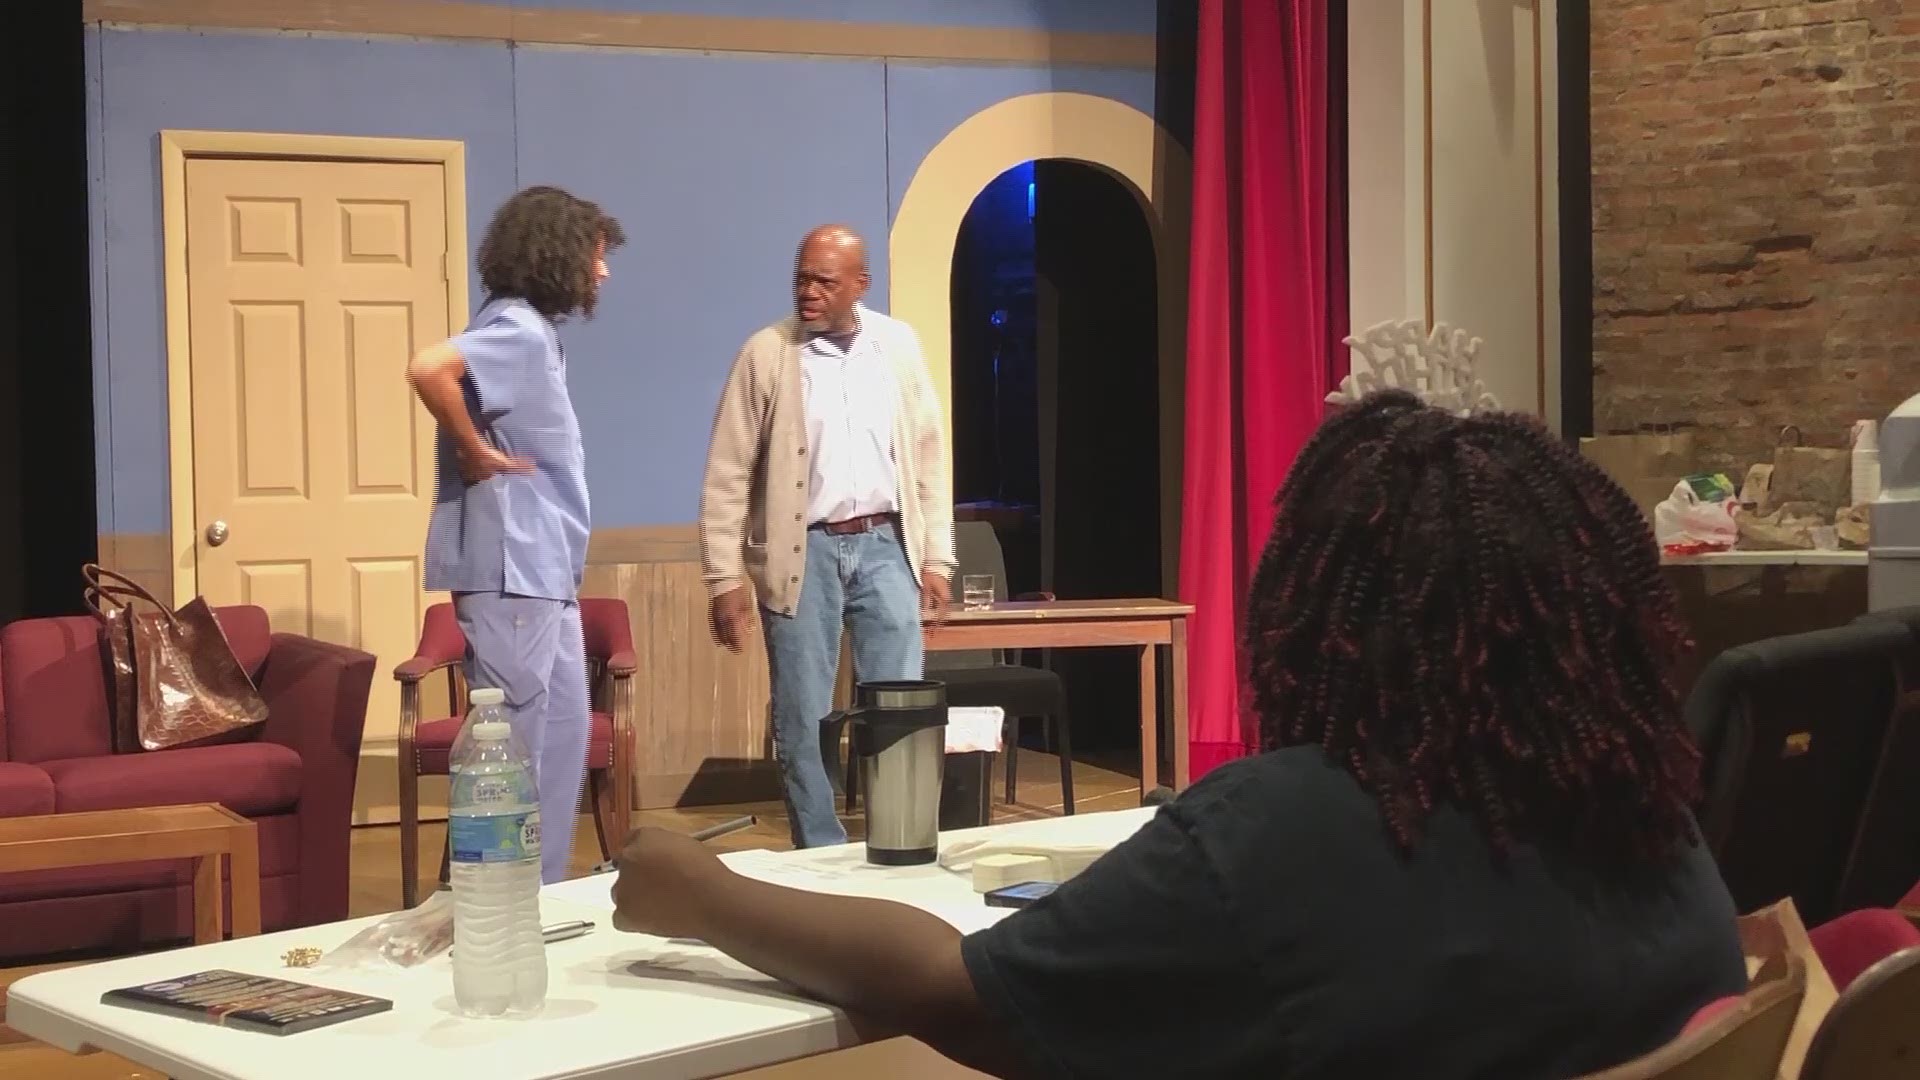 New play in Hapeville takes a fresh new spin on classic Shakespearean tale